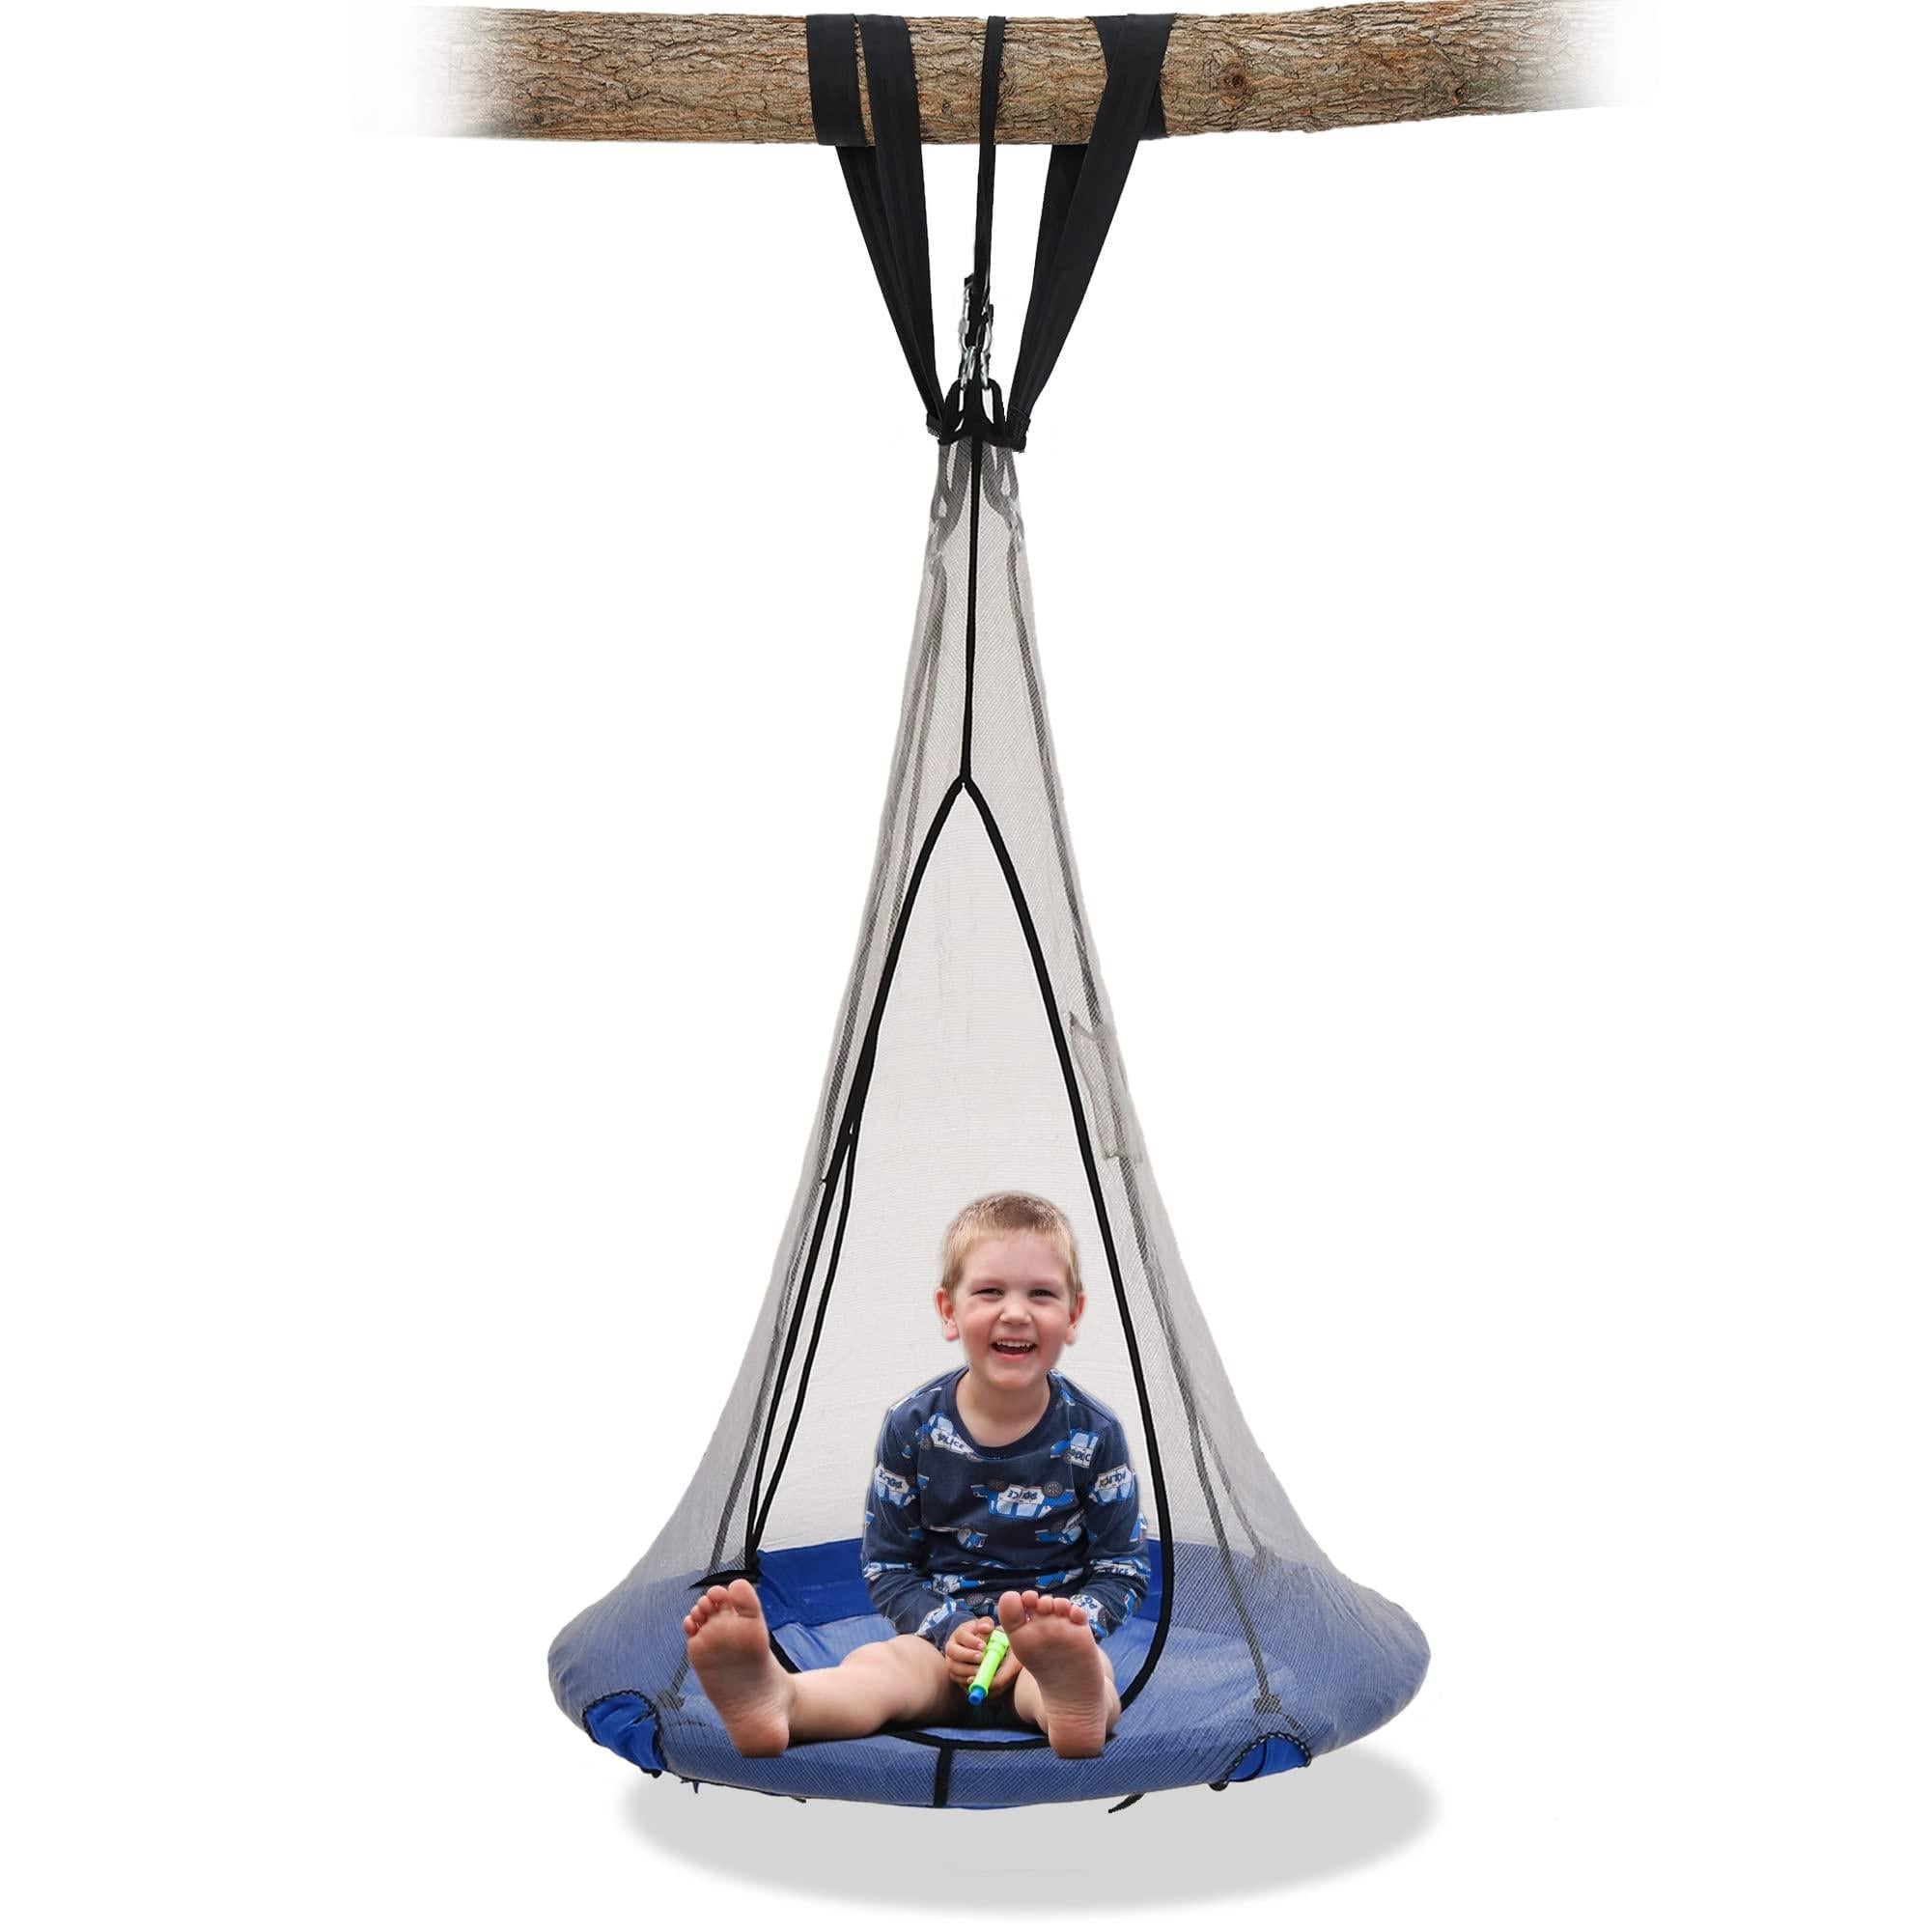 SkyBound 39 Saucer Tree Swing for Kids, Outdoor Flying Swing for Adult  Support Up to 700lbs